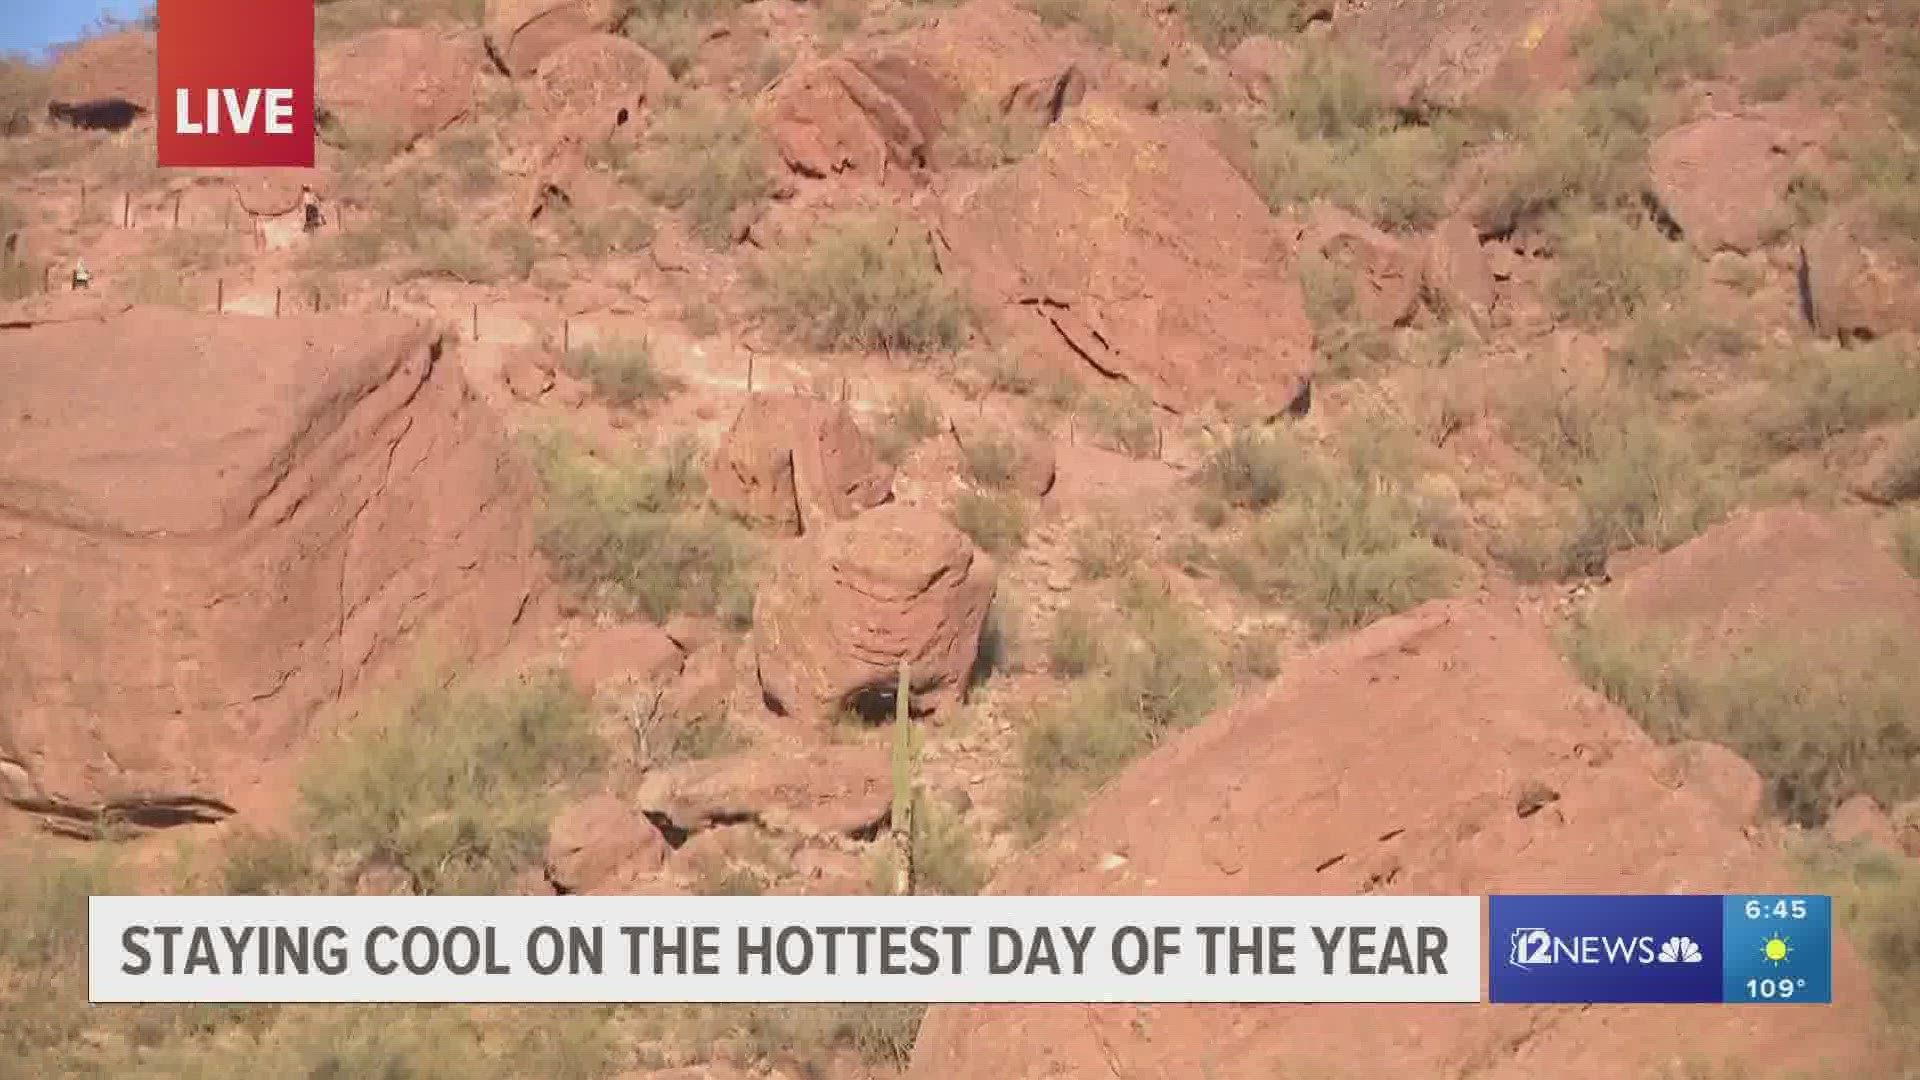 Excessive heat in the Valley caused hiking trails to close for part of the day.